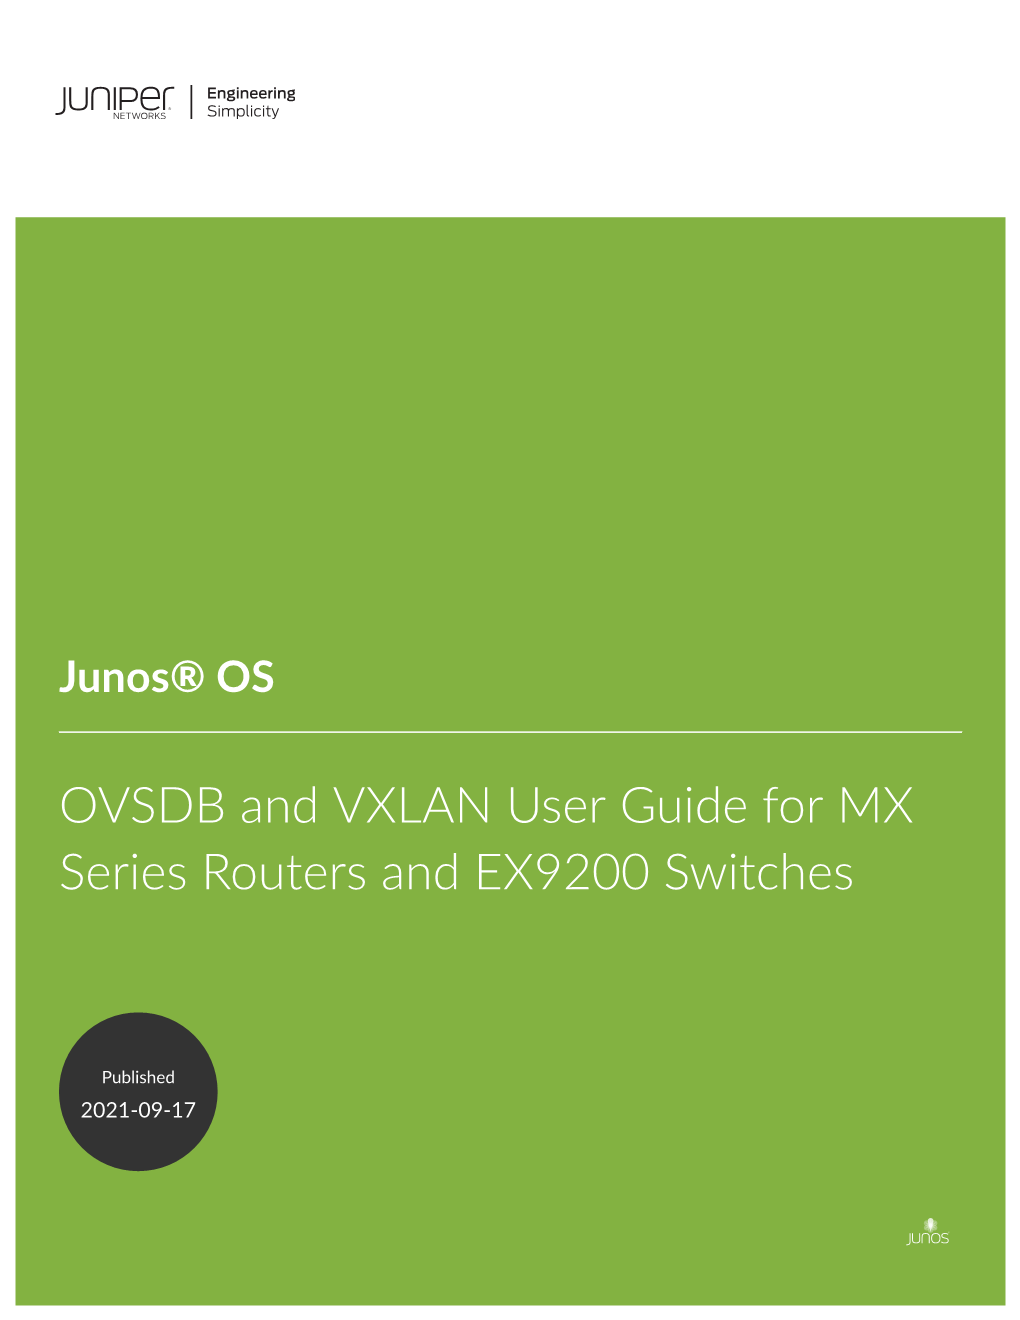 Junos® OS OVSDB and VXLAN User Guide for MX Series Routers and EX9200 Switches Copyright © 2021 Juniper Networks, Inc